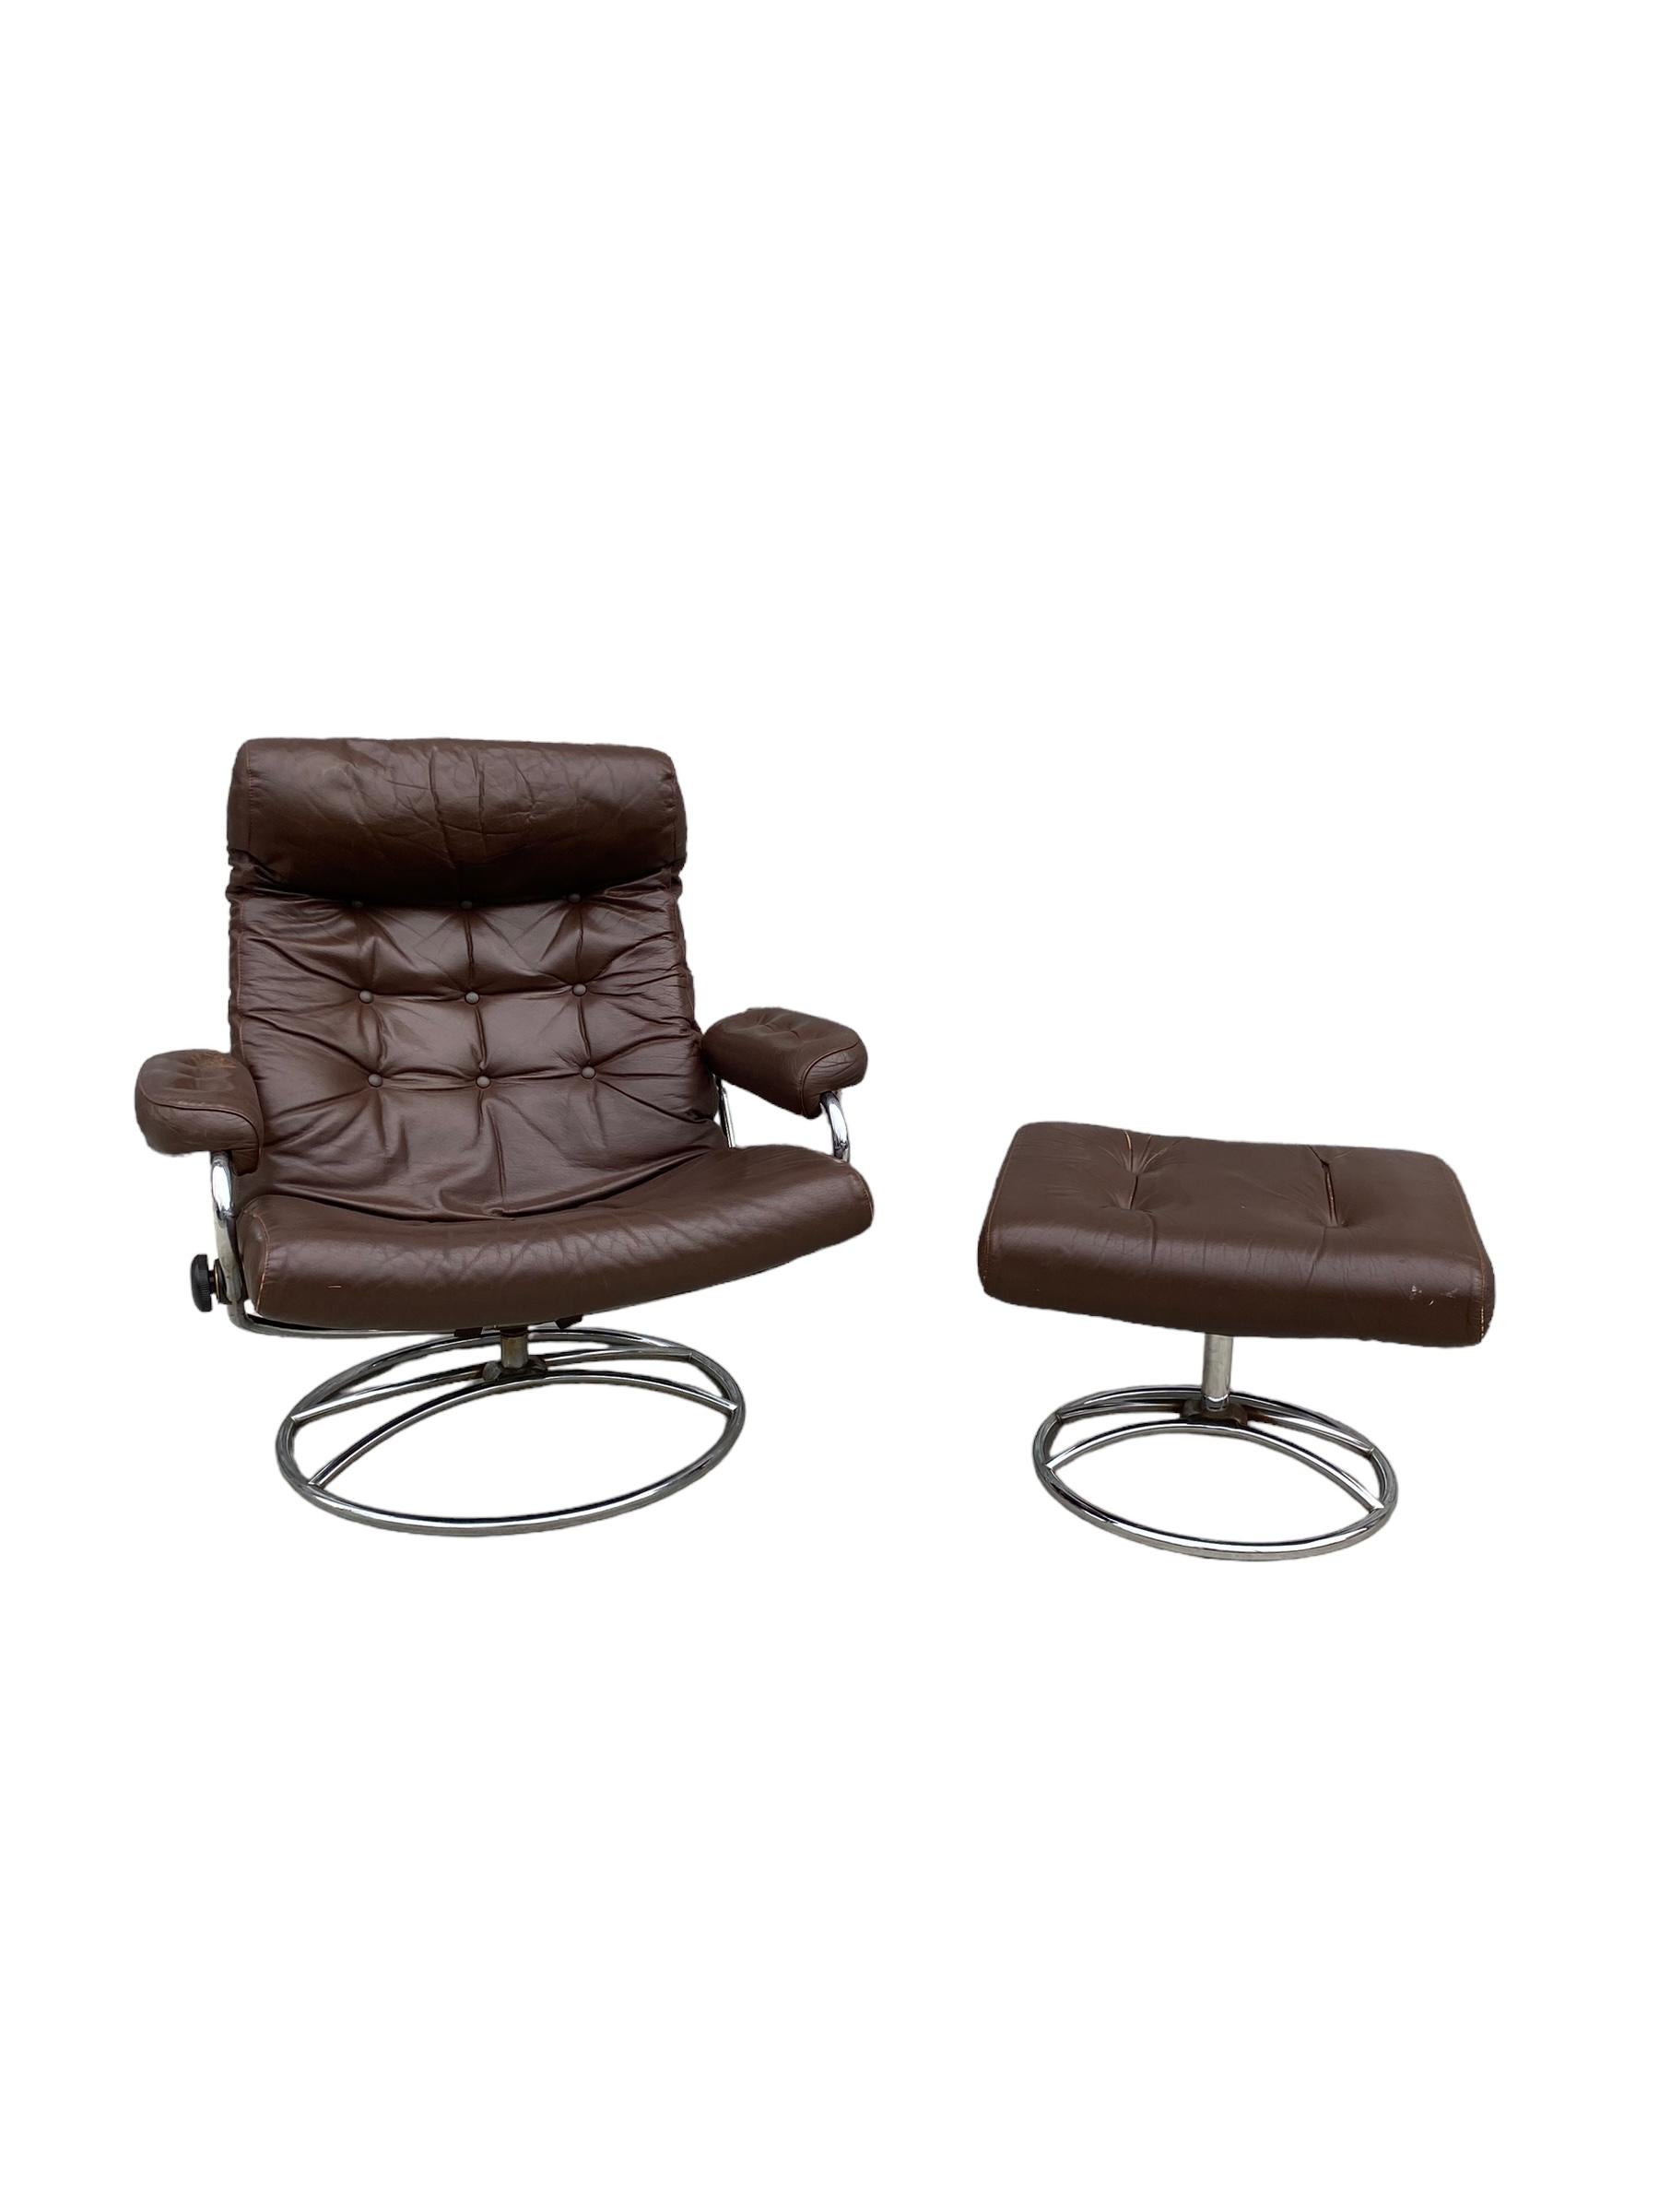 Ekornes Stressless reclining lounge chair and ottoman. Elegant mid century Scandinavian design with tubular bent chrome frame and brown leather cushion. Lounge in comfort with this timeless design.